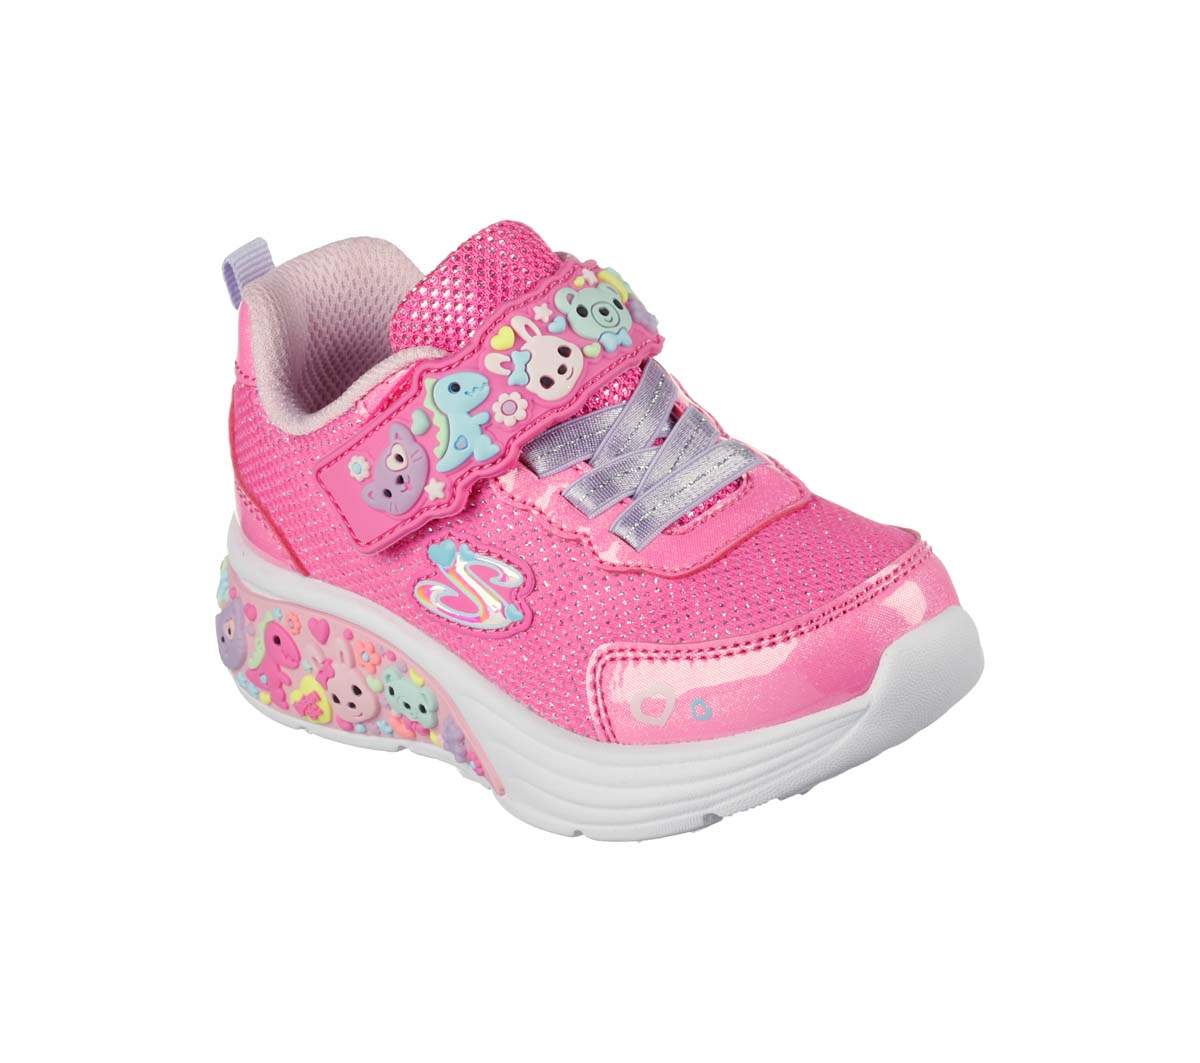 Skechers My Dreamers PKMT Pink Kids girls trainers 303155N in a Plain Man-made in Size 24